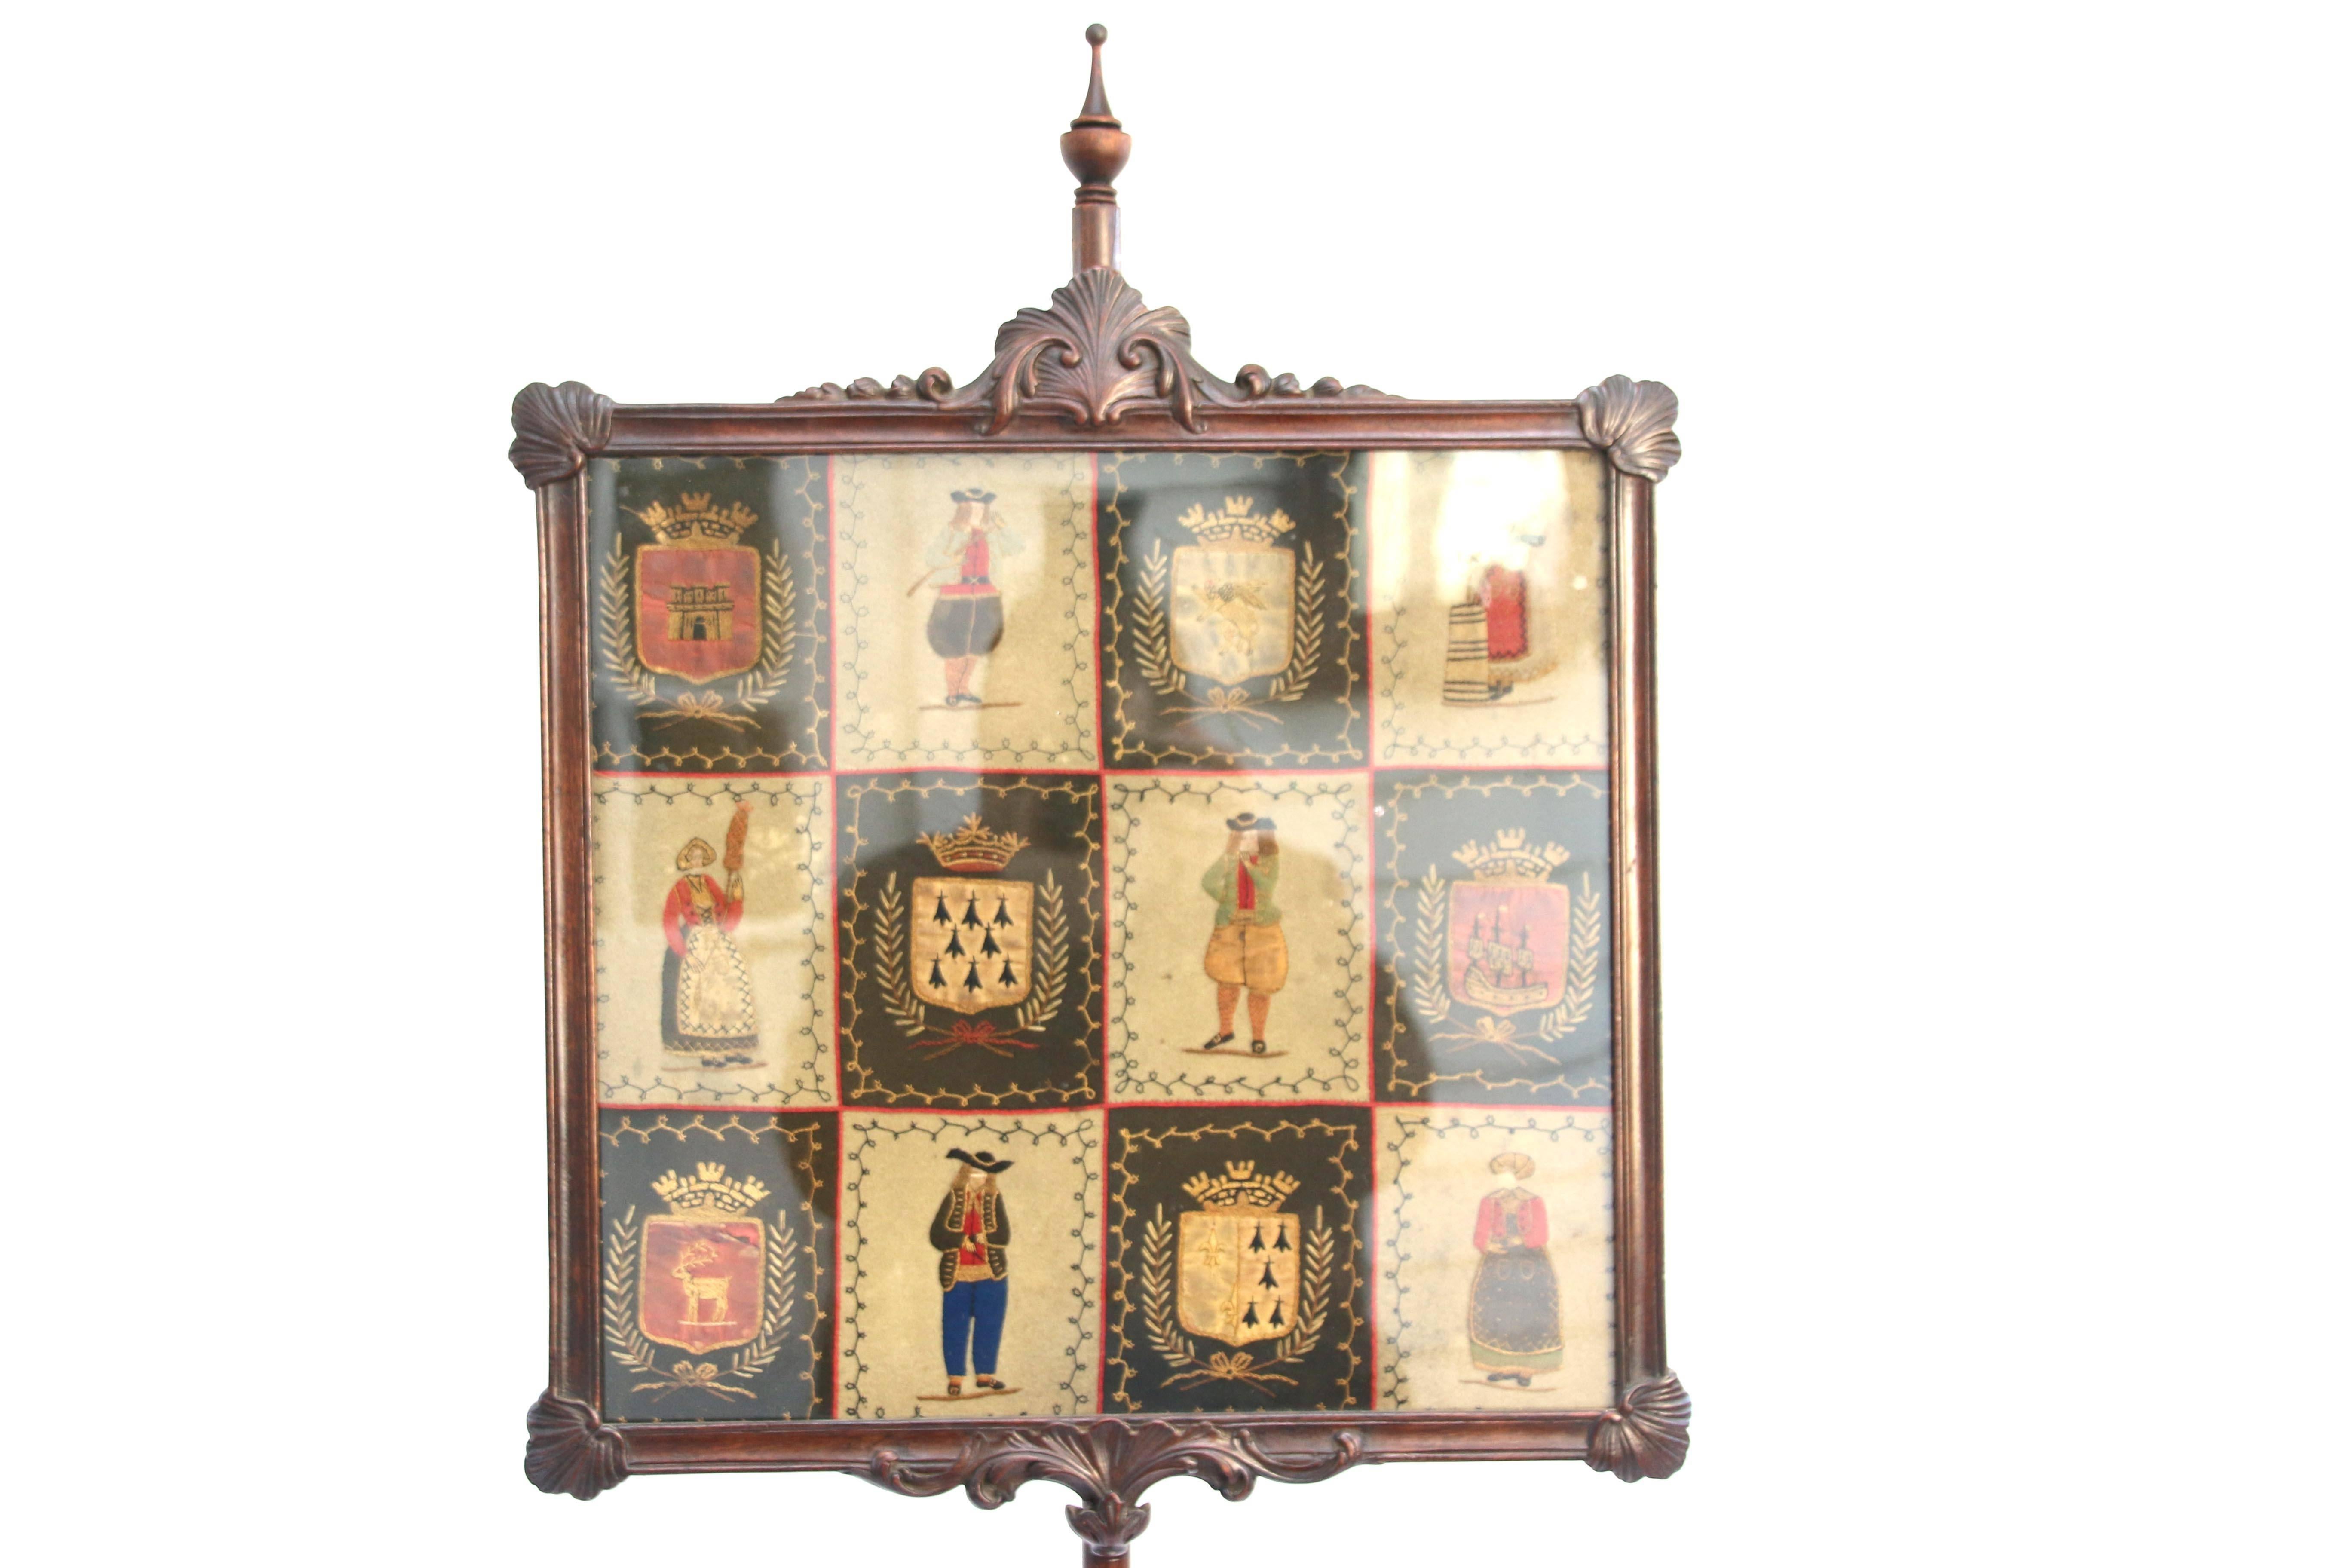 Massachusetts Queen Anne Cuban mahogany pole screen retaining an old surface with original rare needlework depicting multiple marriages within the same family in a square shell and floral carved motif frame joined to a bulbous spiral-reeded urn form